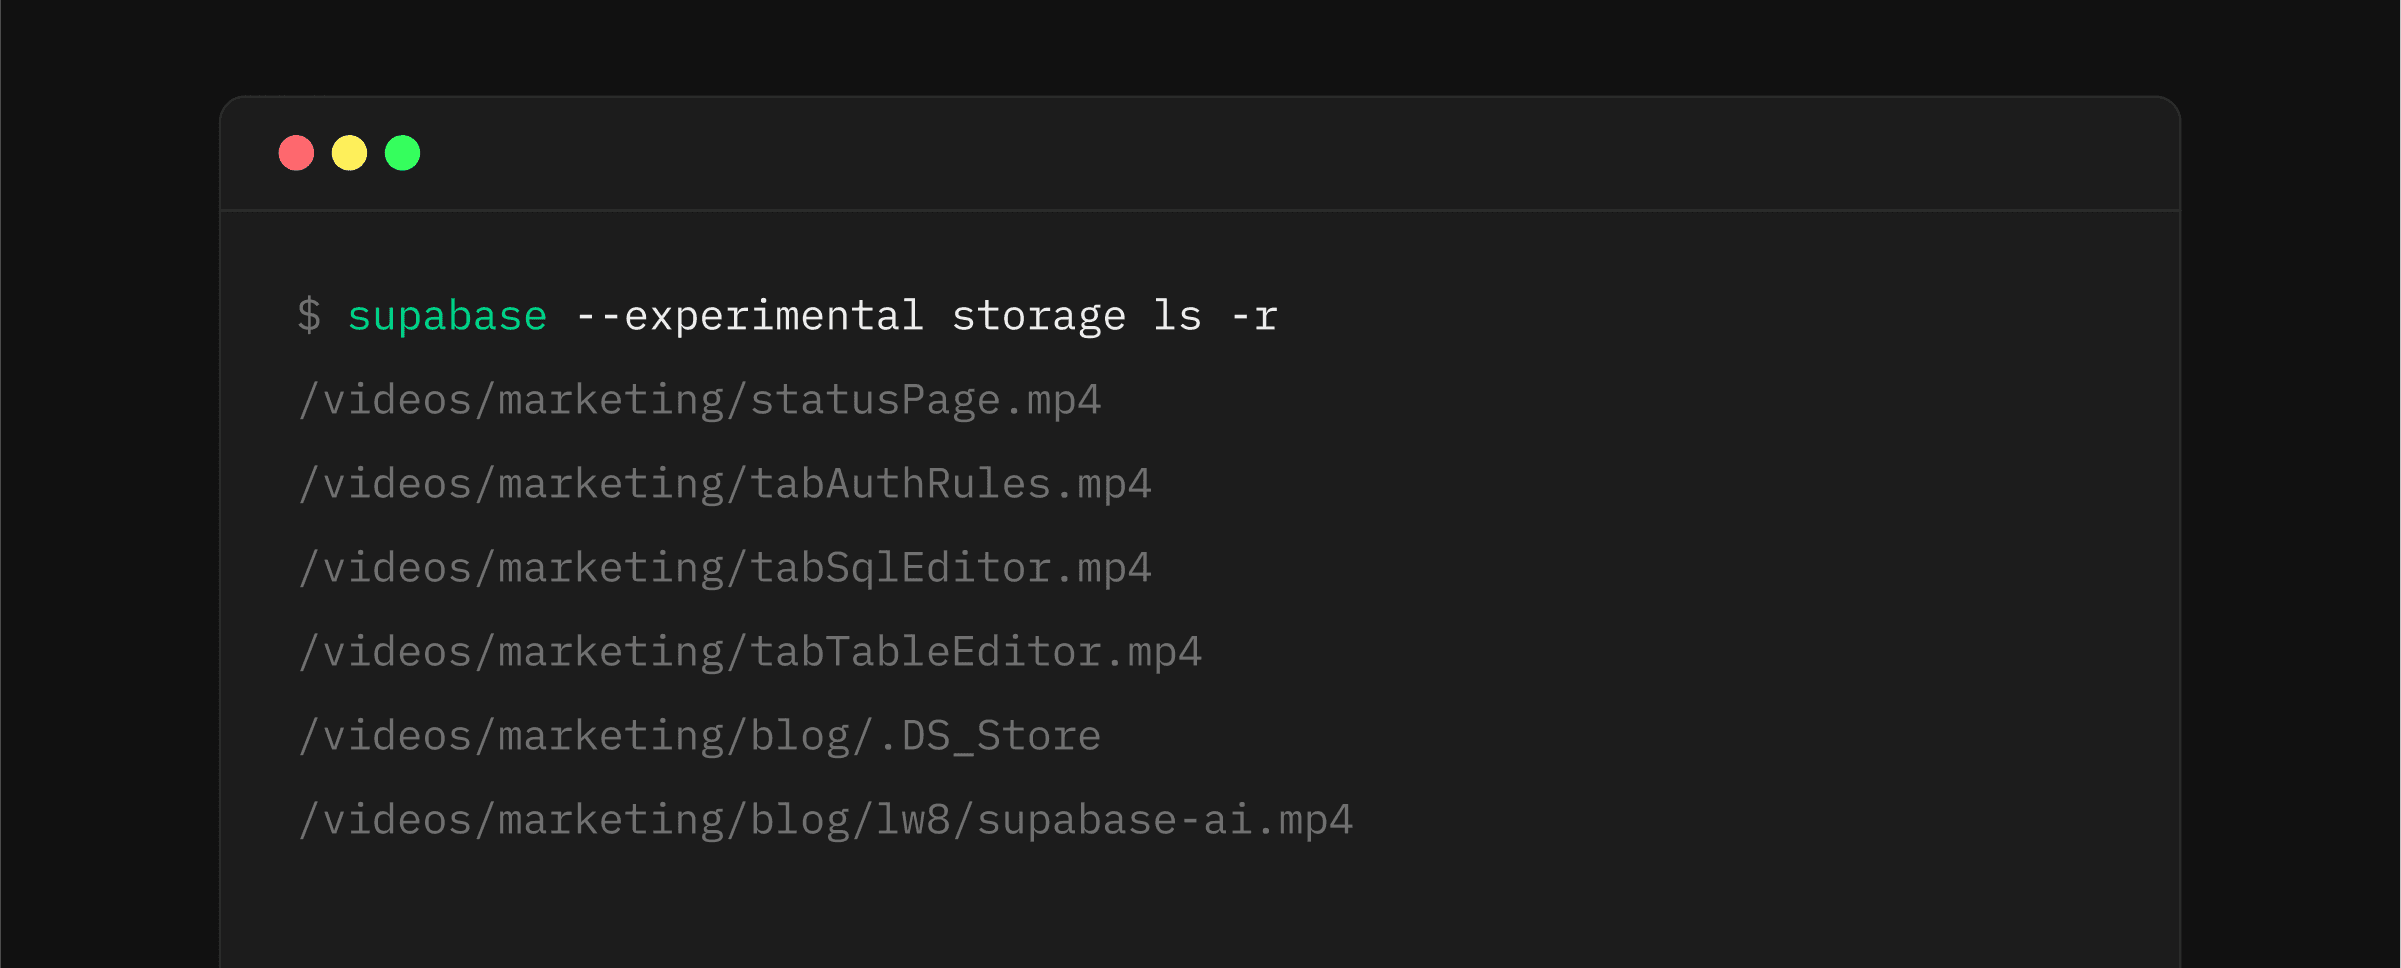 Manage storage buckets from the command line